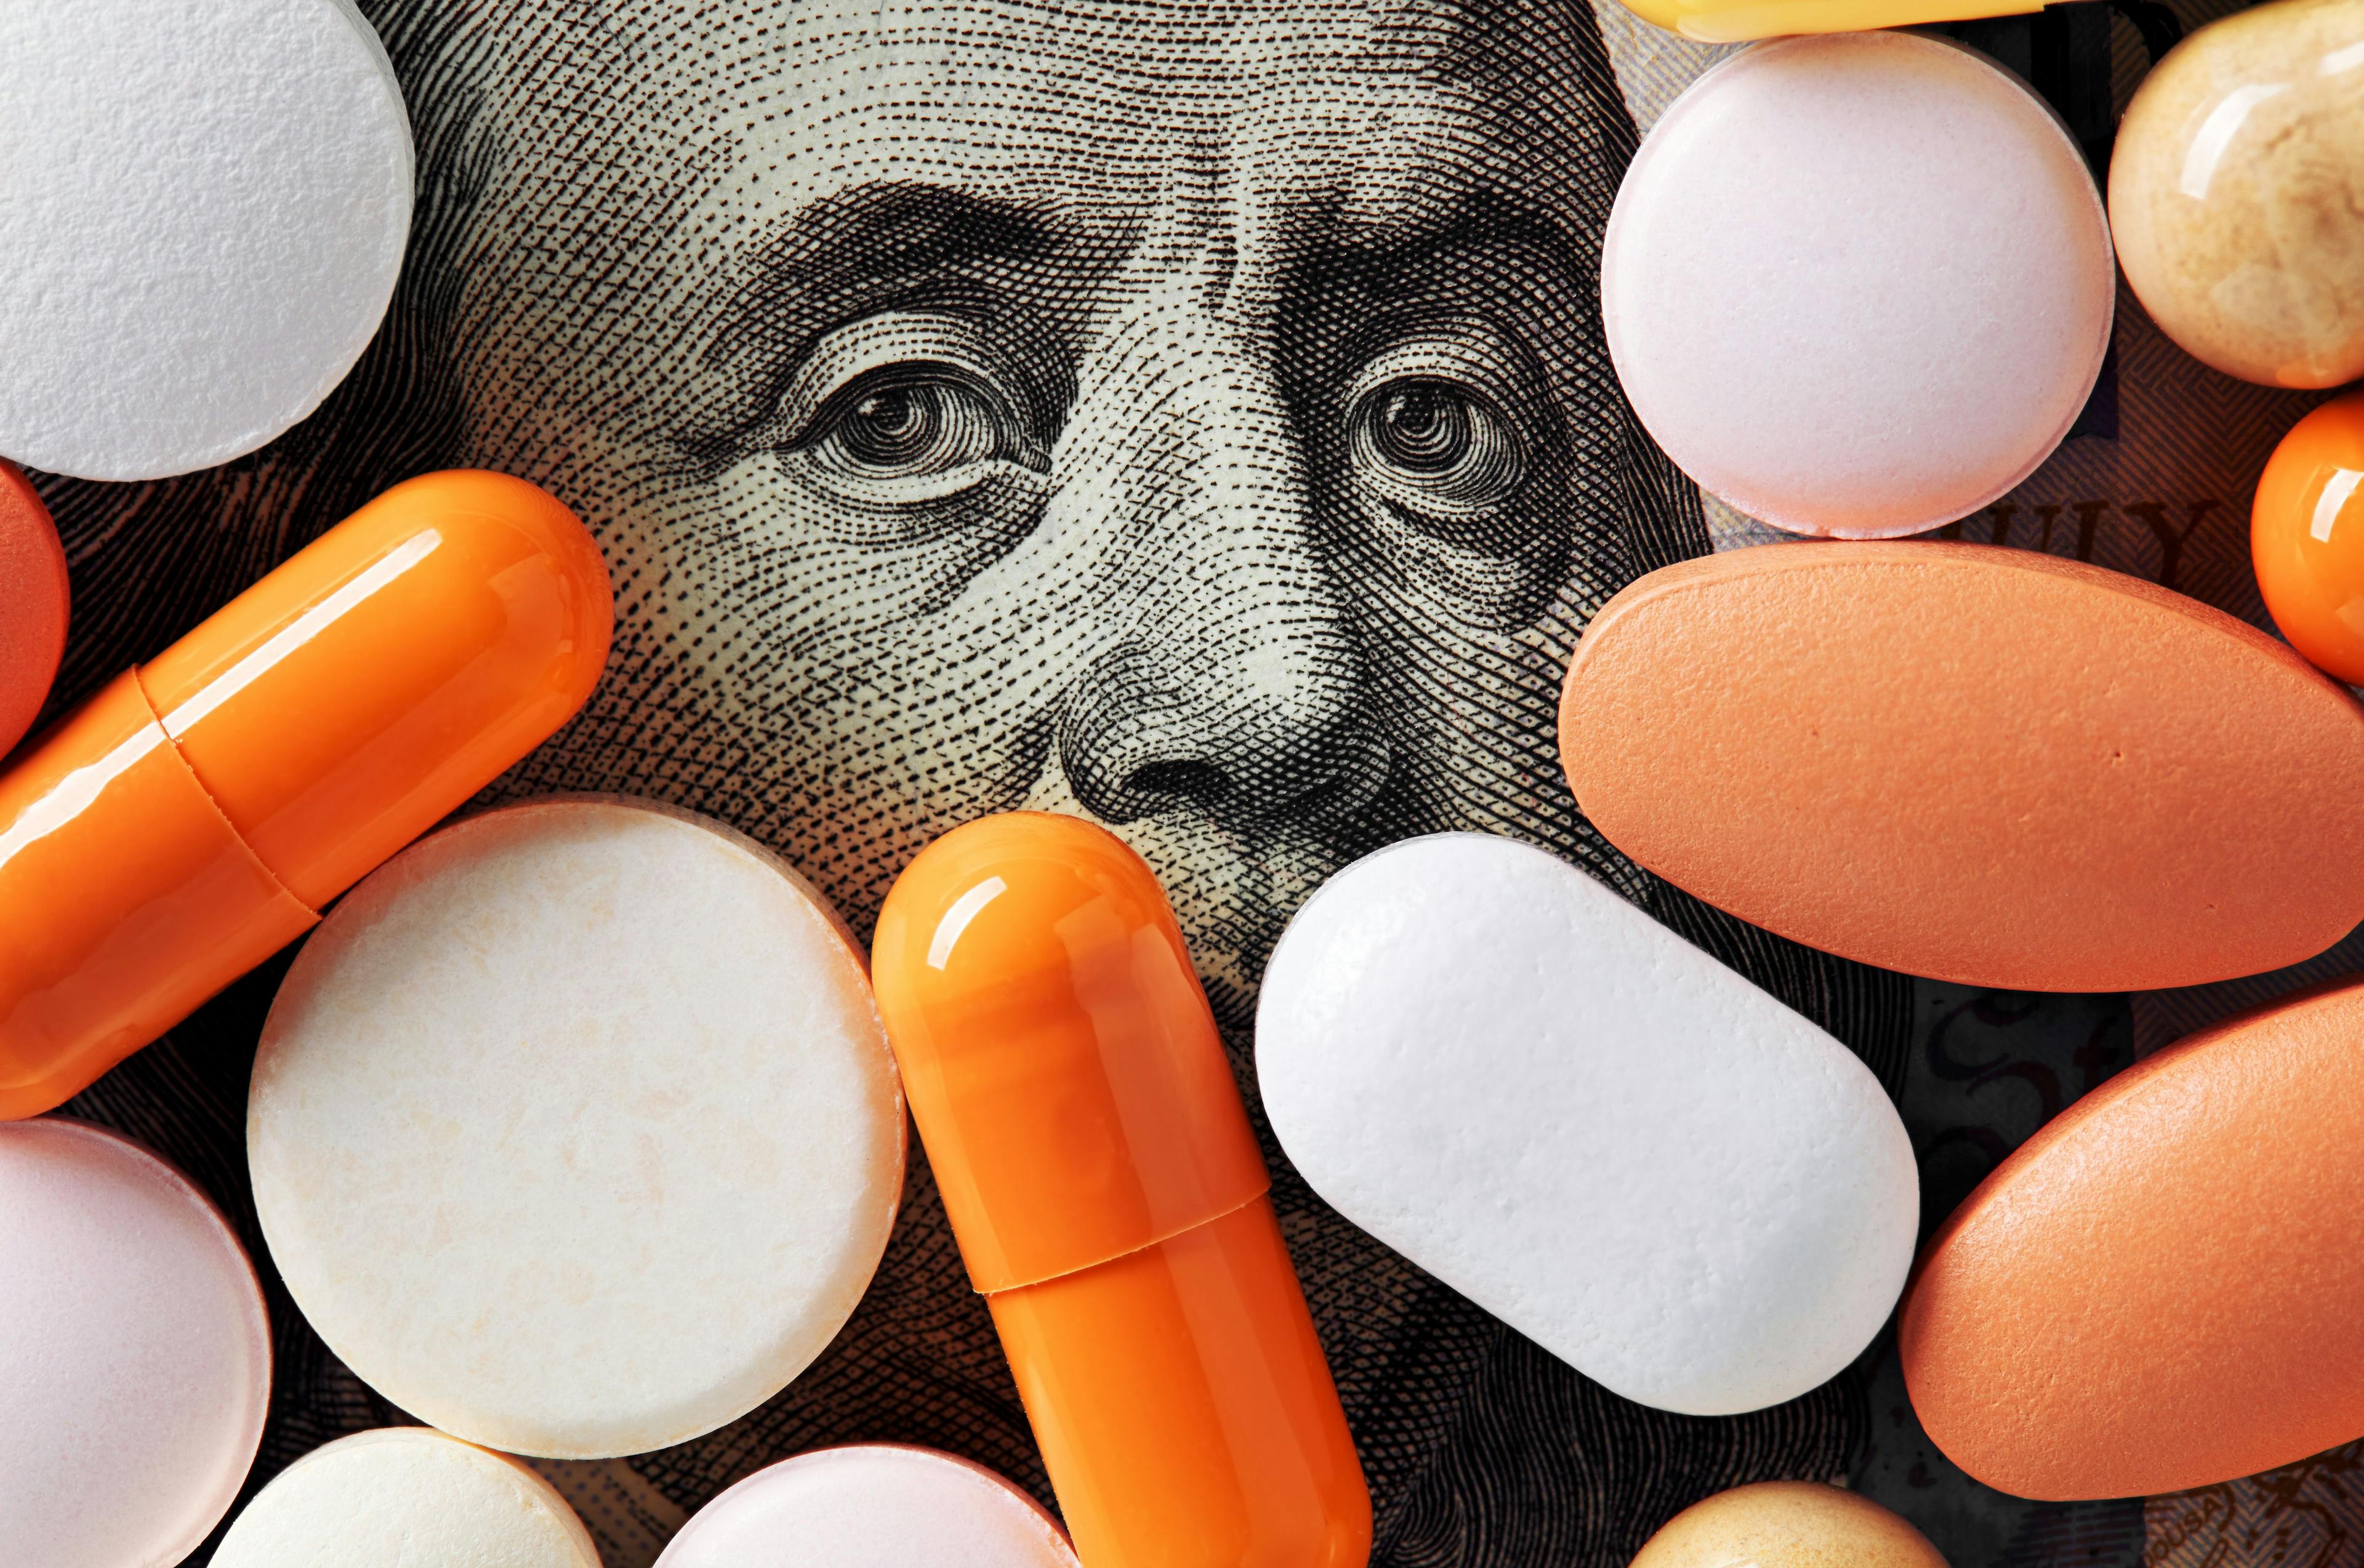 Pills on a background of a one hundred American dollar bill | Image credit: Cagkan - stock.adobe.com